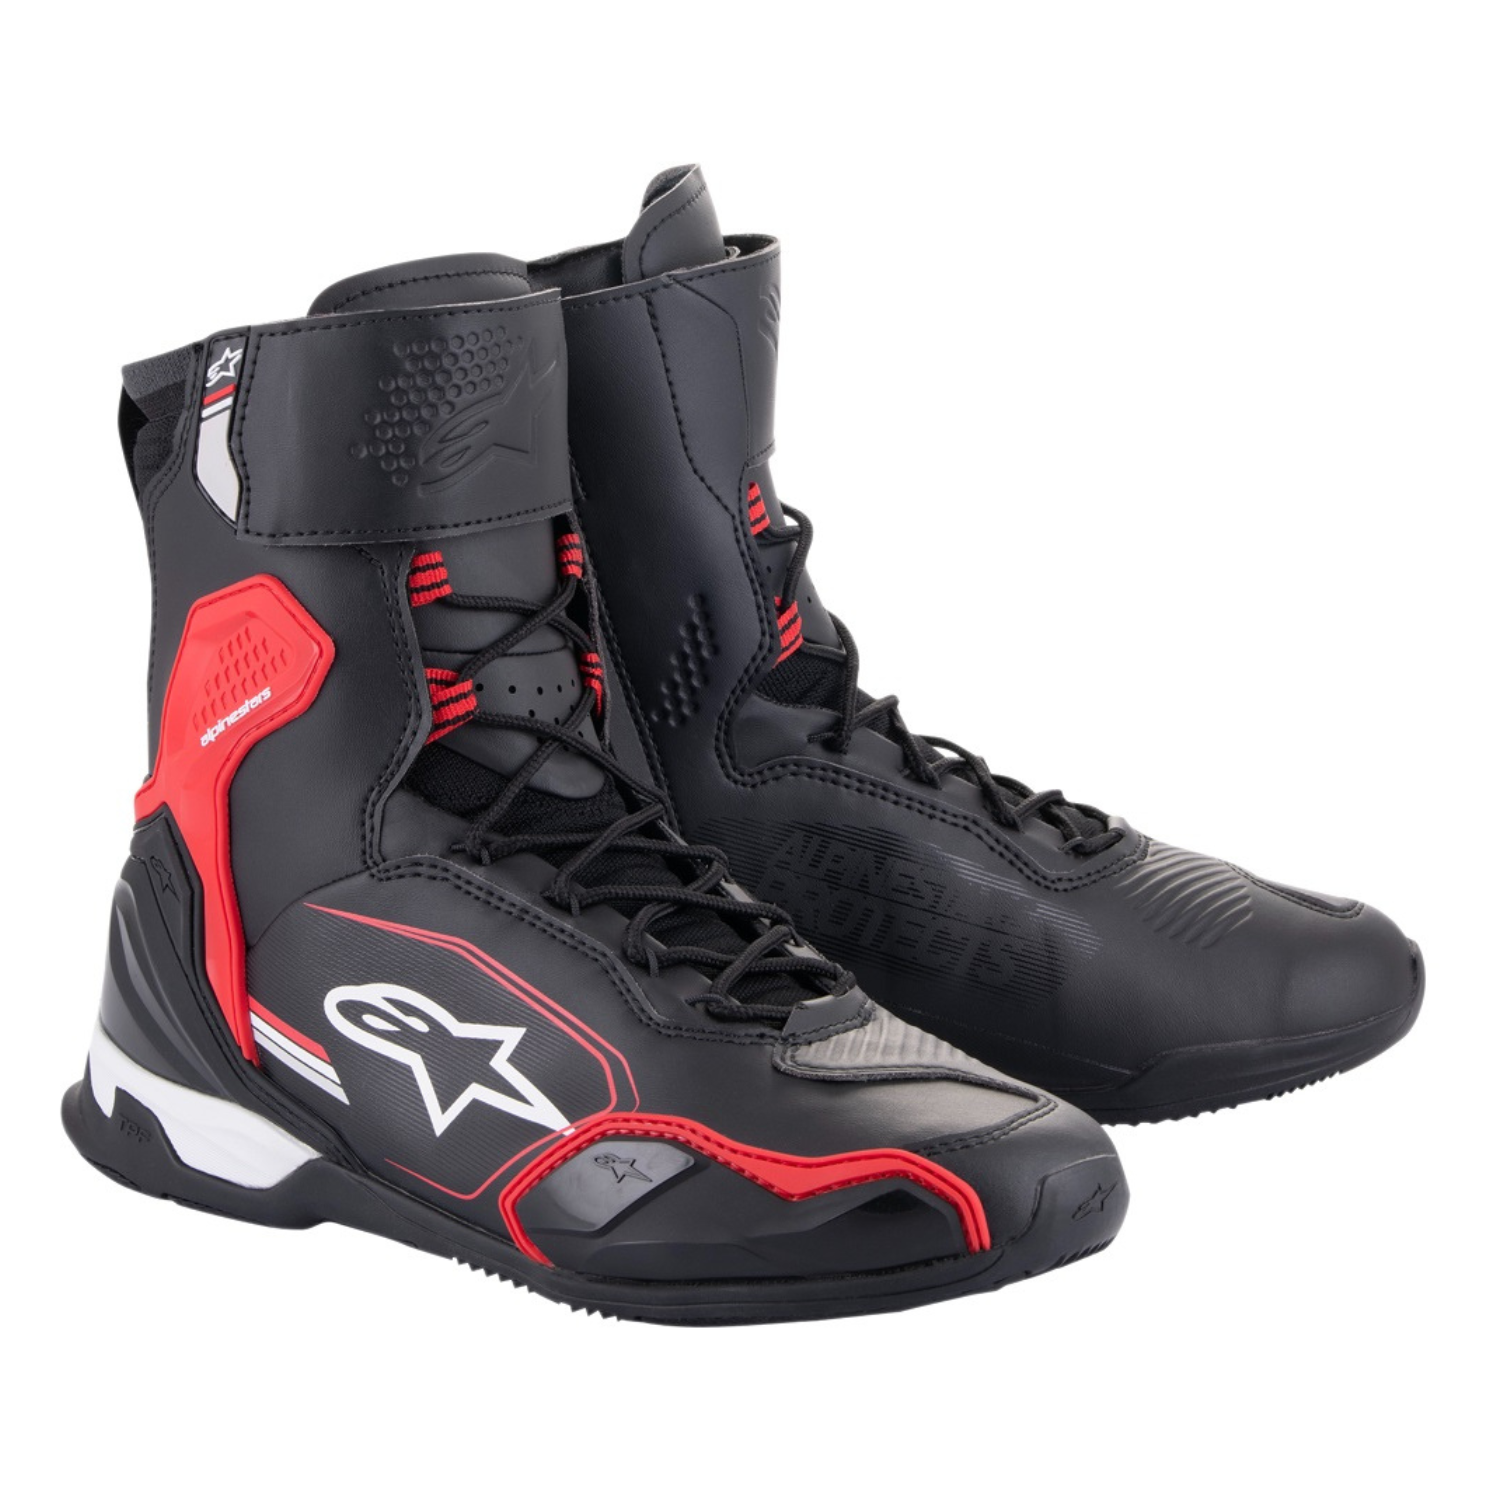 Image of Alpinestars Superfaster Shoes Black Bright Red White Size US 95 EN